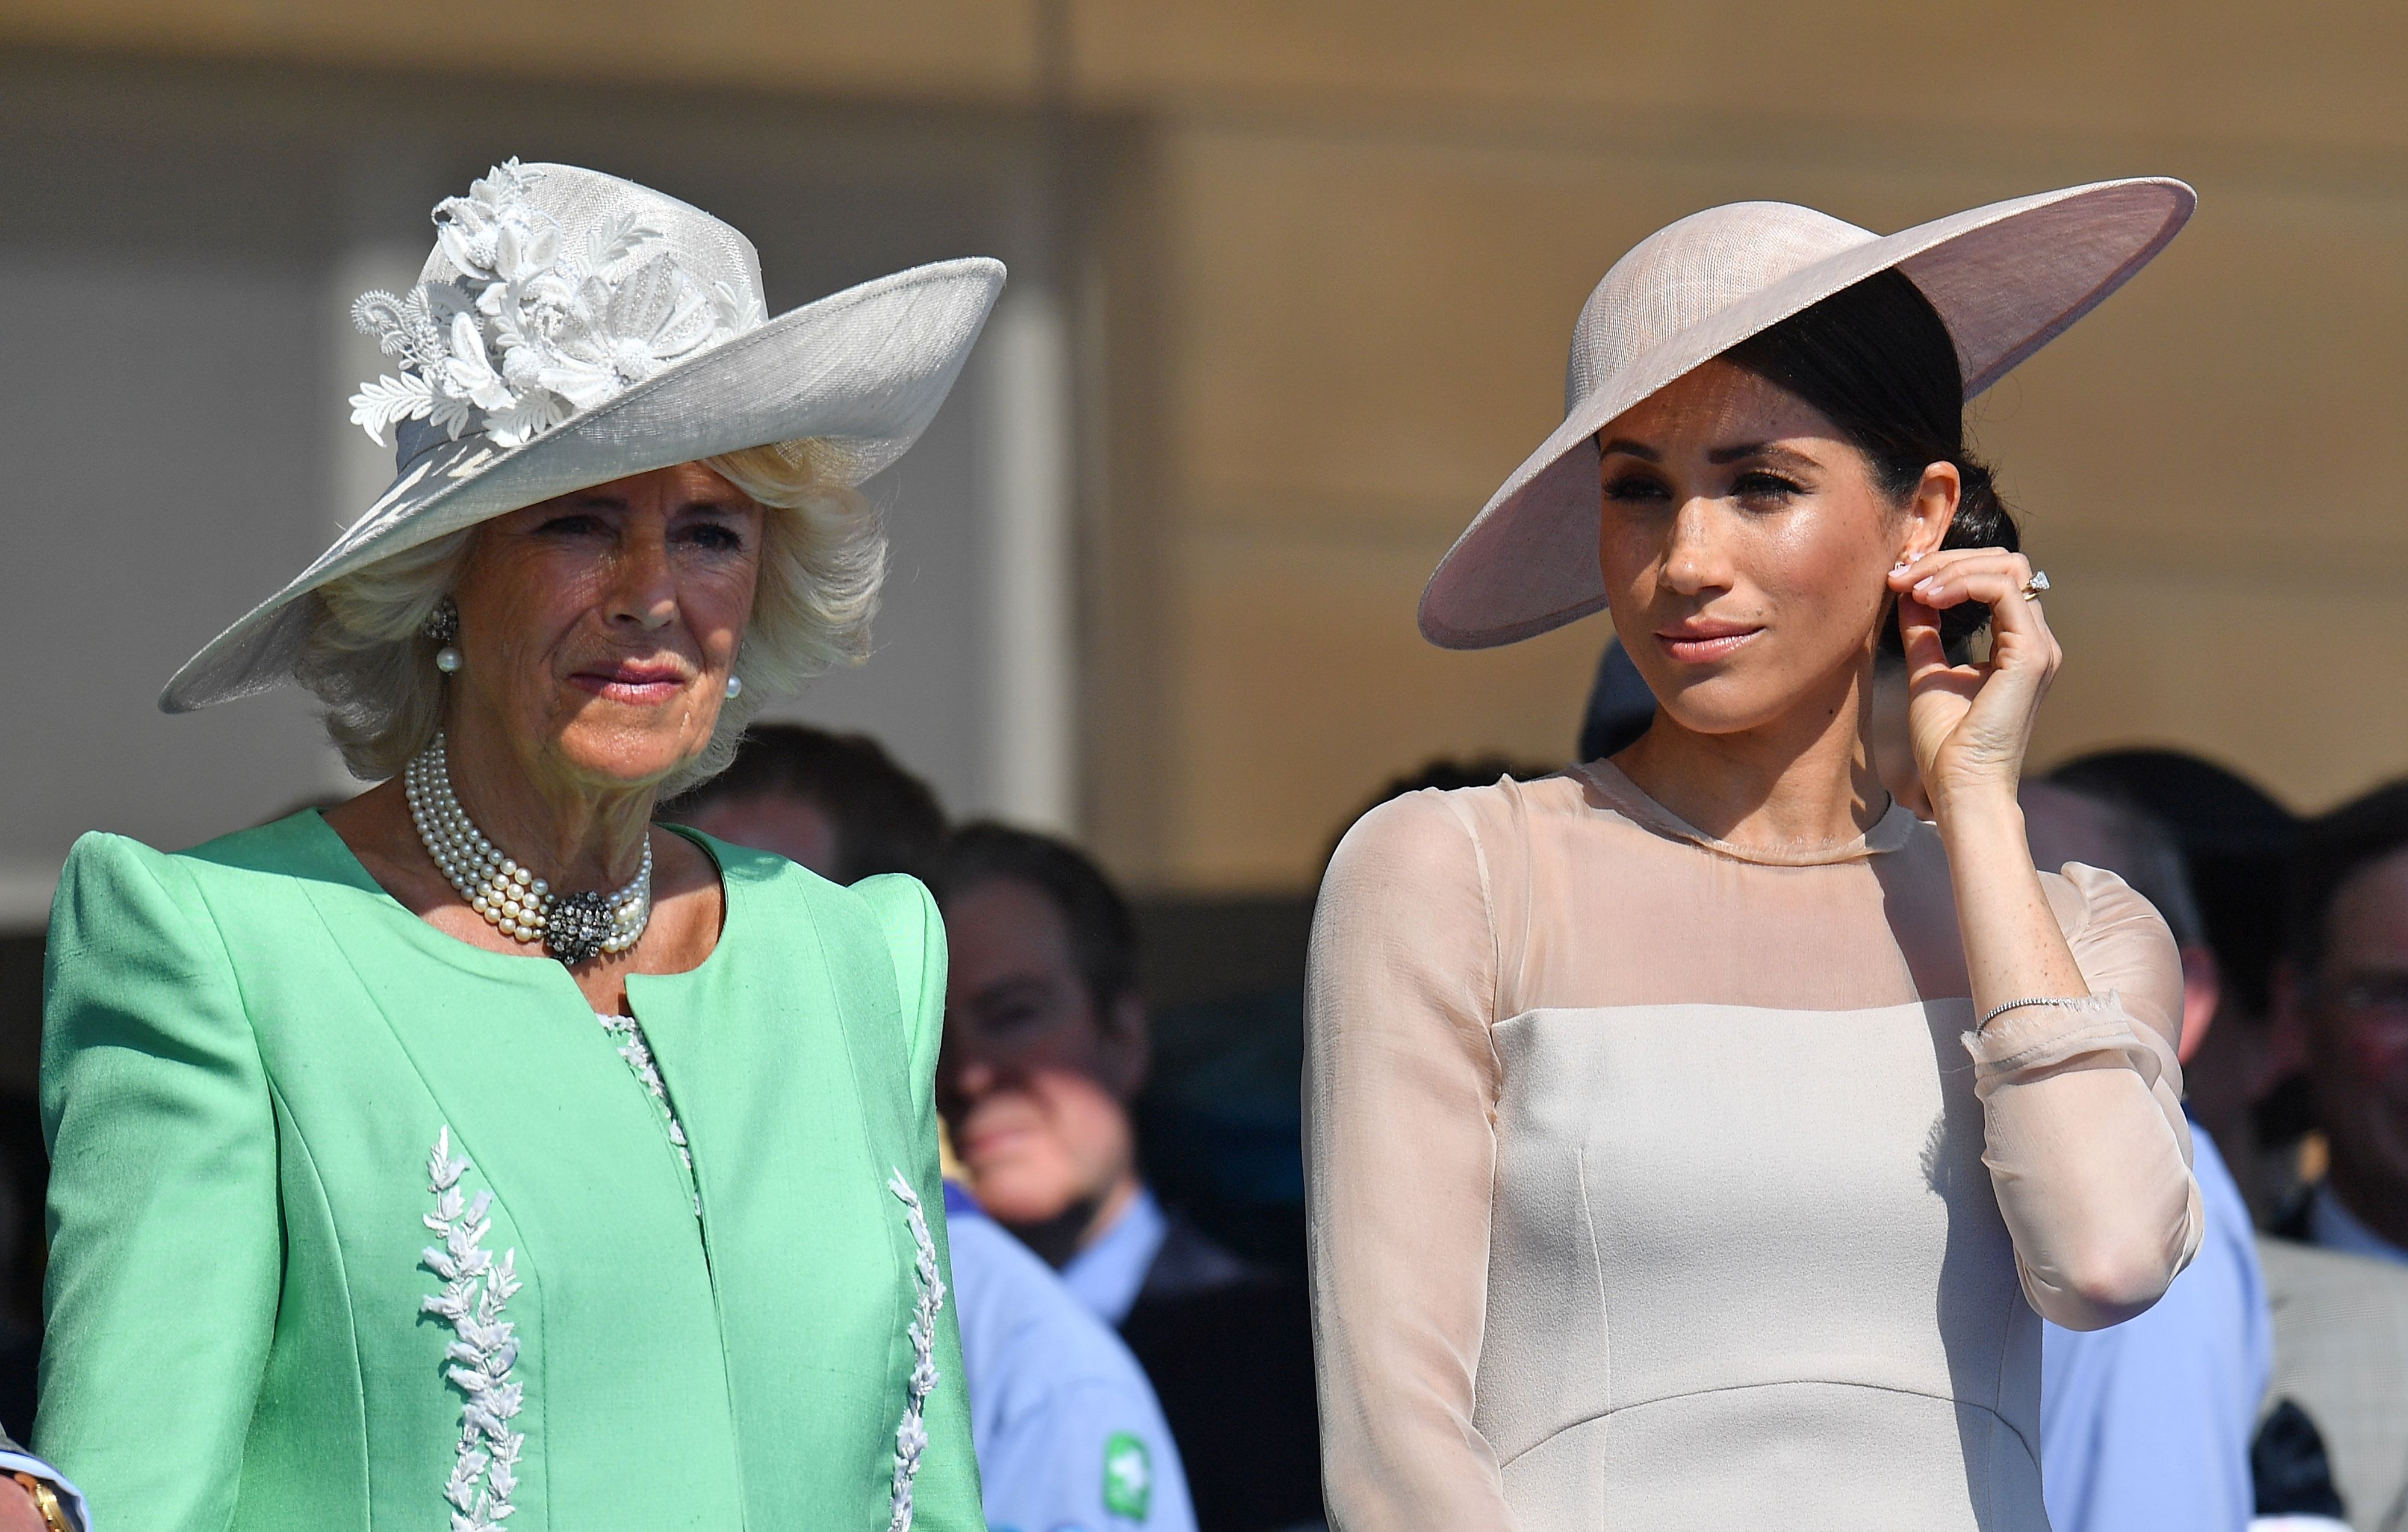 Duchess Camilla and Duchess Meghan at Prince Charles' 70th Birthday Patronage Celebration on May 22, 2018, in London, England. | Source: Dominic Lipinski - Pool/Getty Images